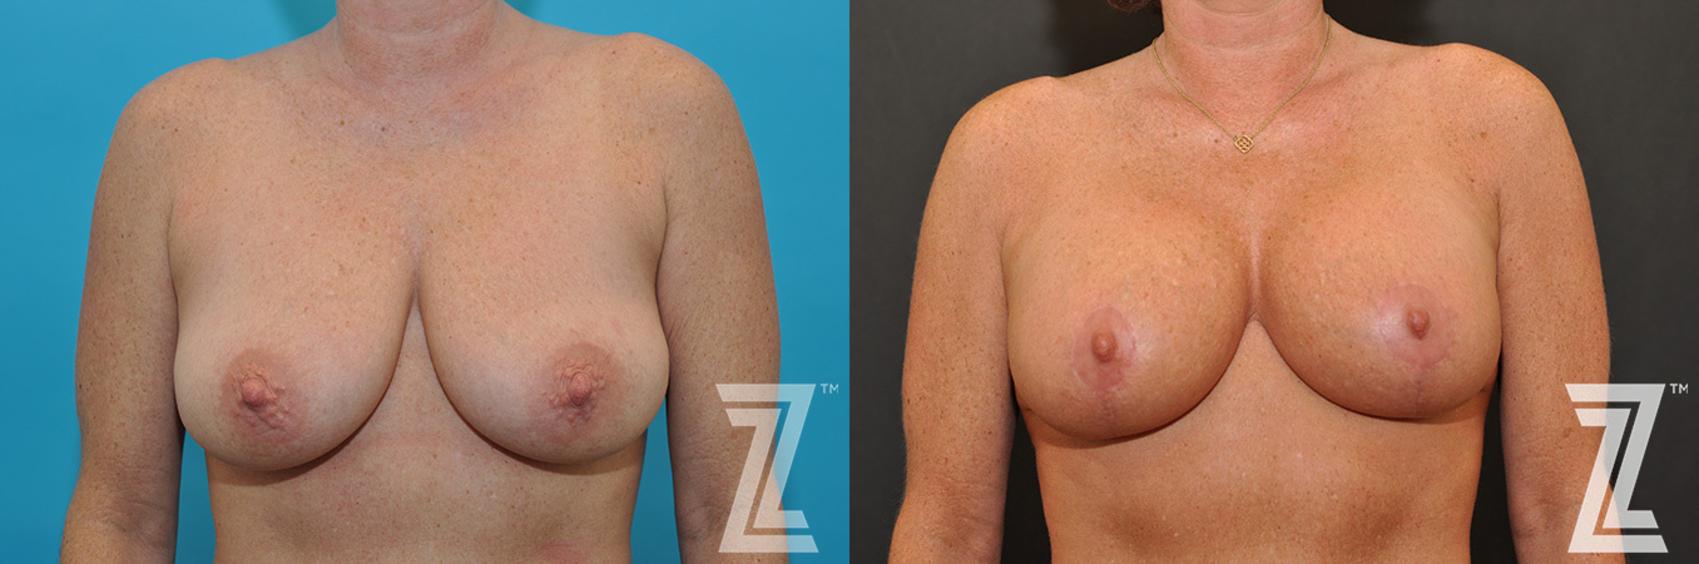 Breast Augmentation with a Breast Lift Before & After Photo | Austin, TX | The Piazza Center for Plastic Surgery & Advanced Skin Care